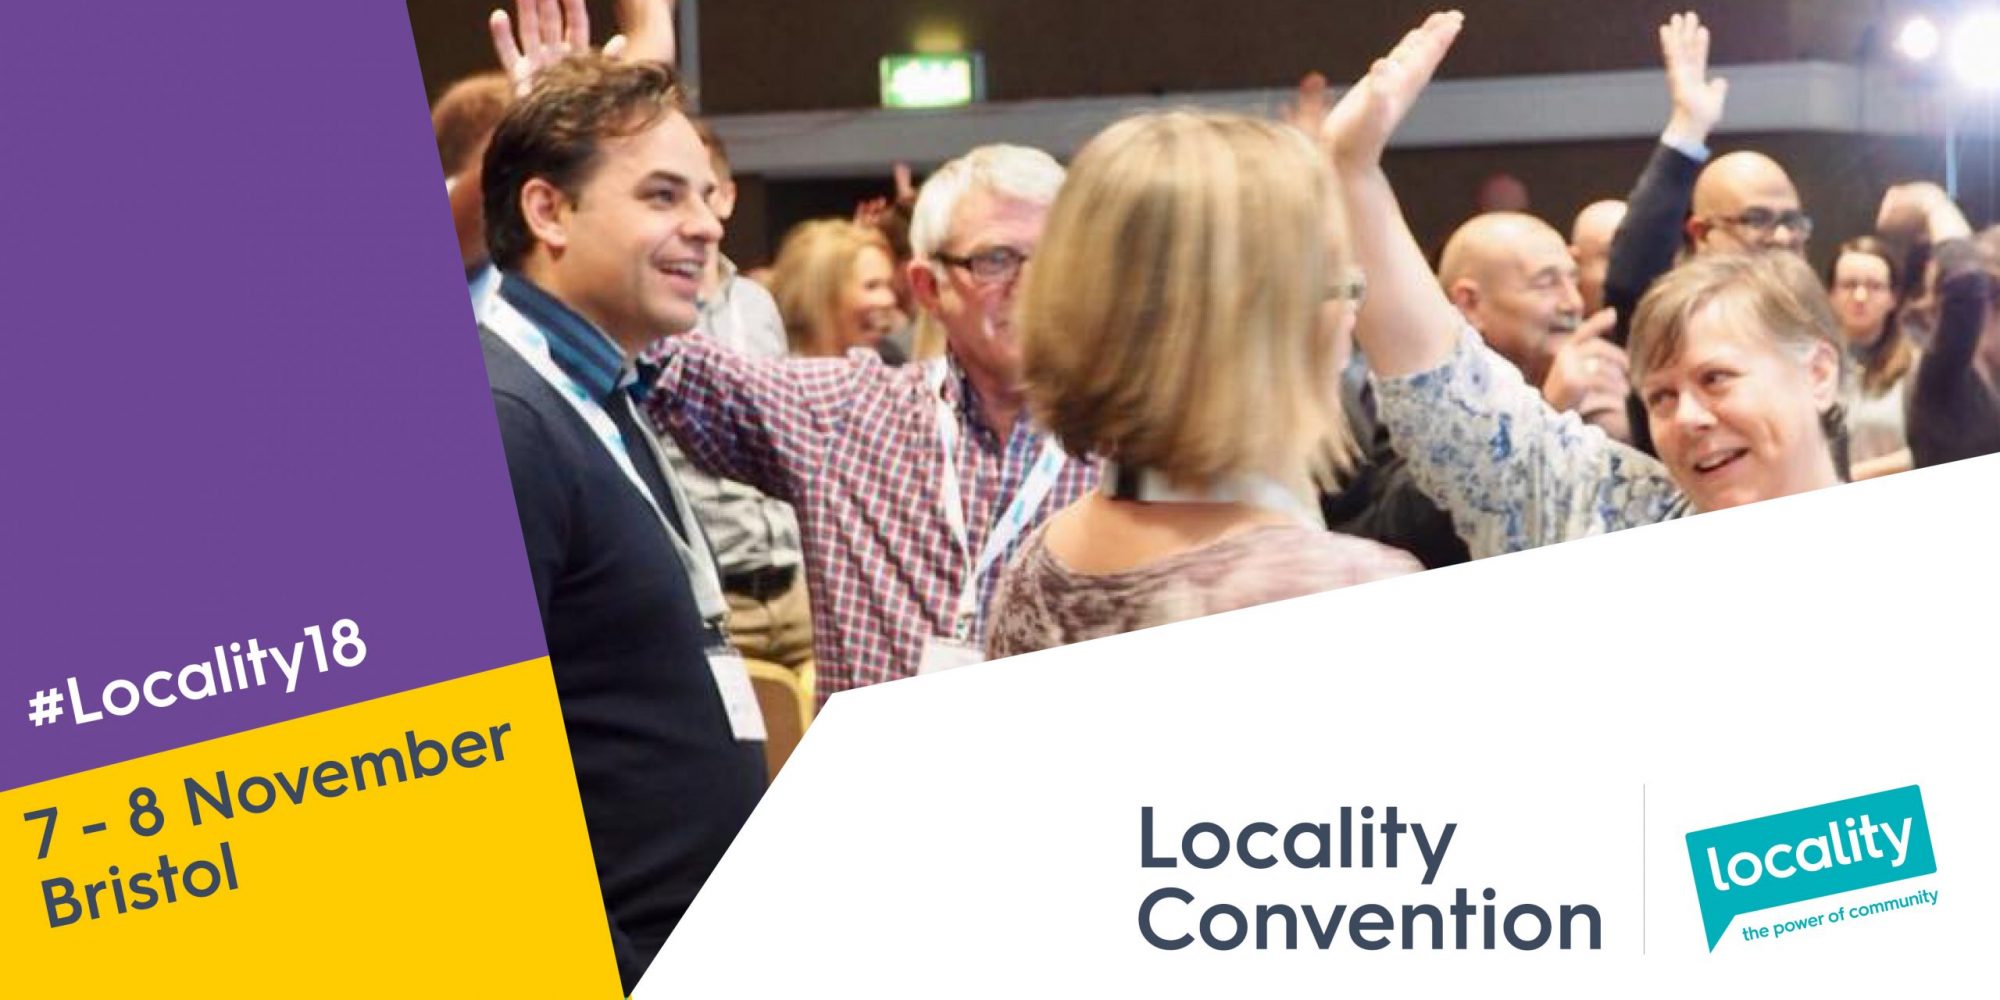 7 reasons why you should attend Locality Convention ‘18